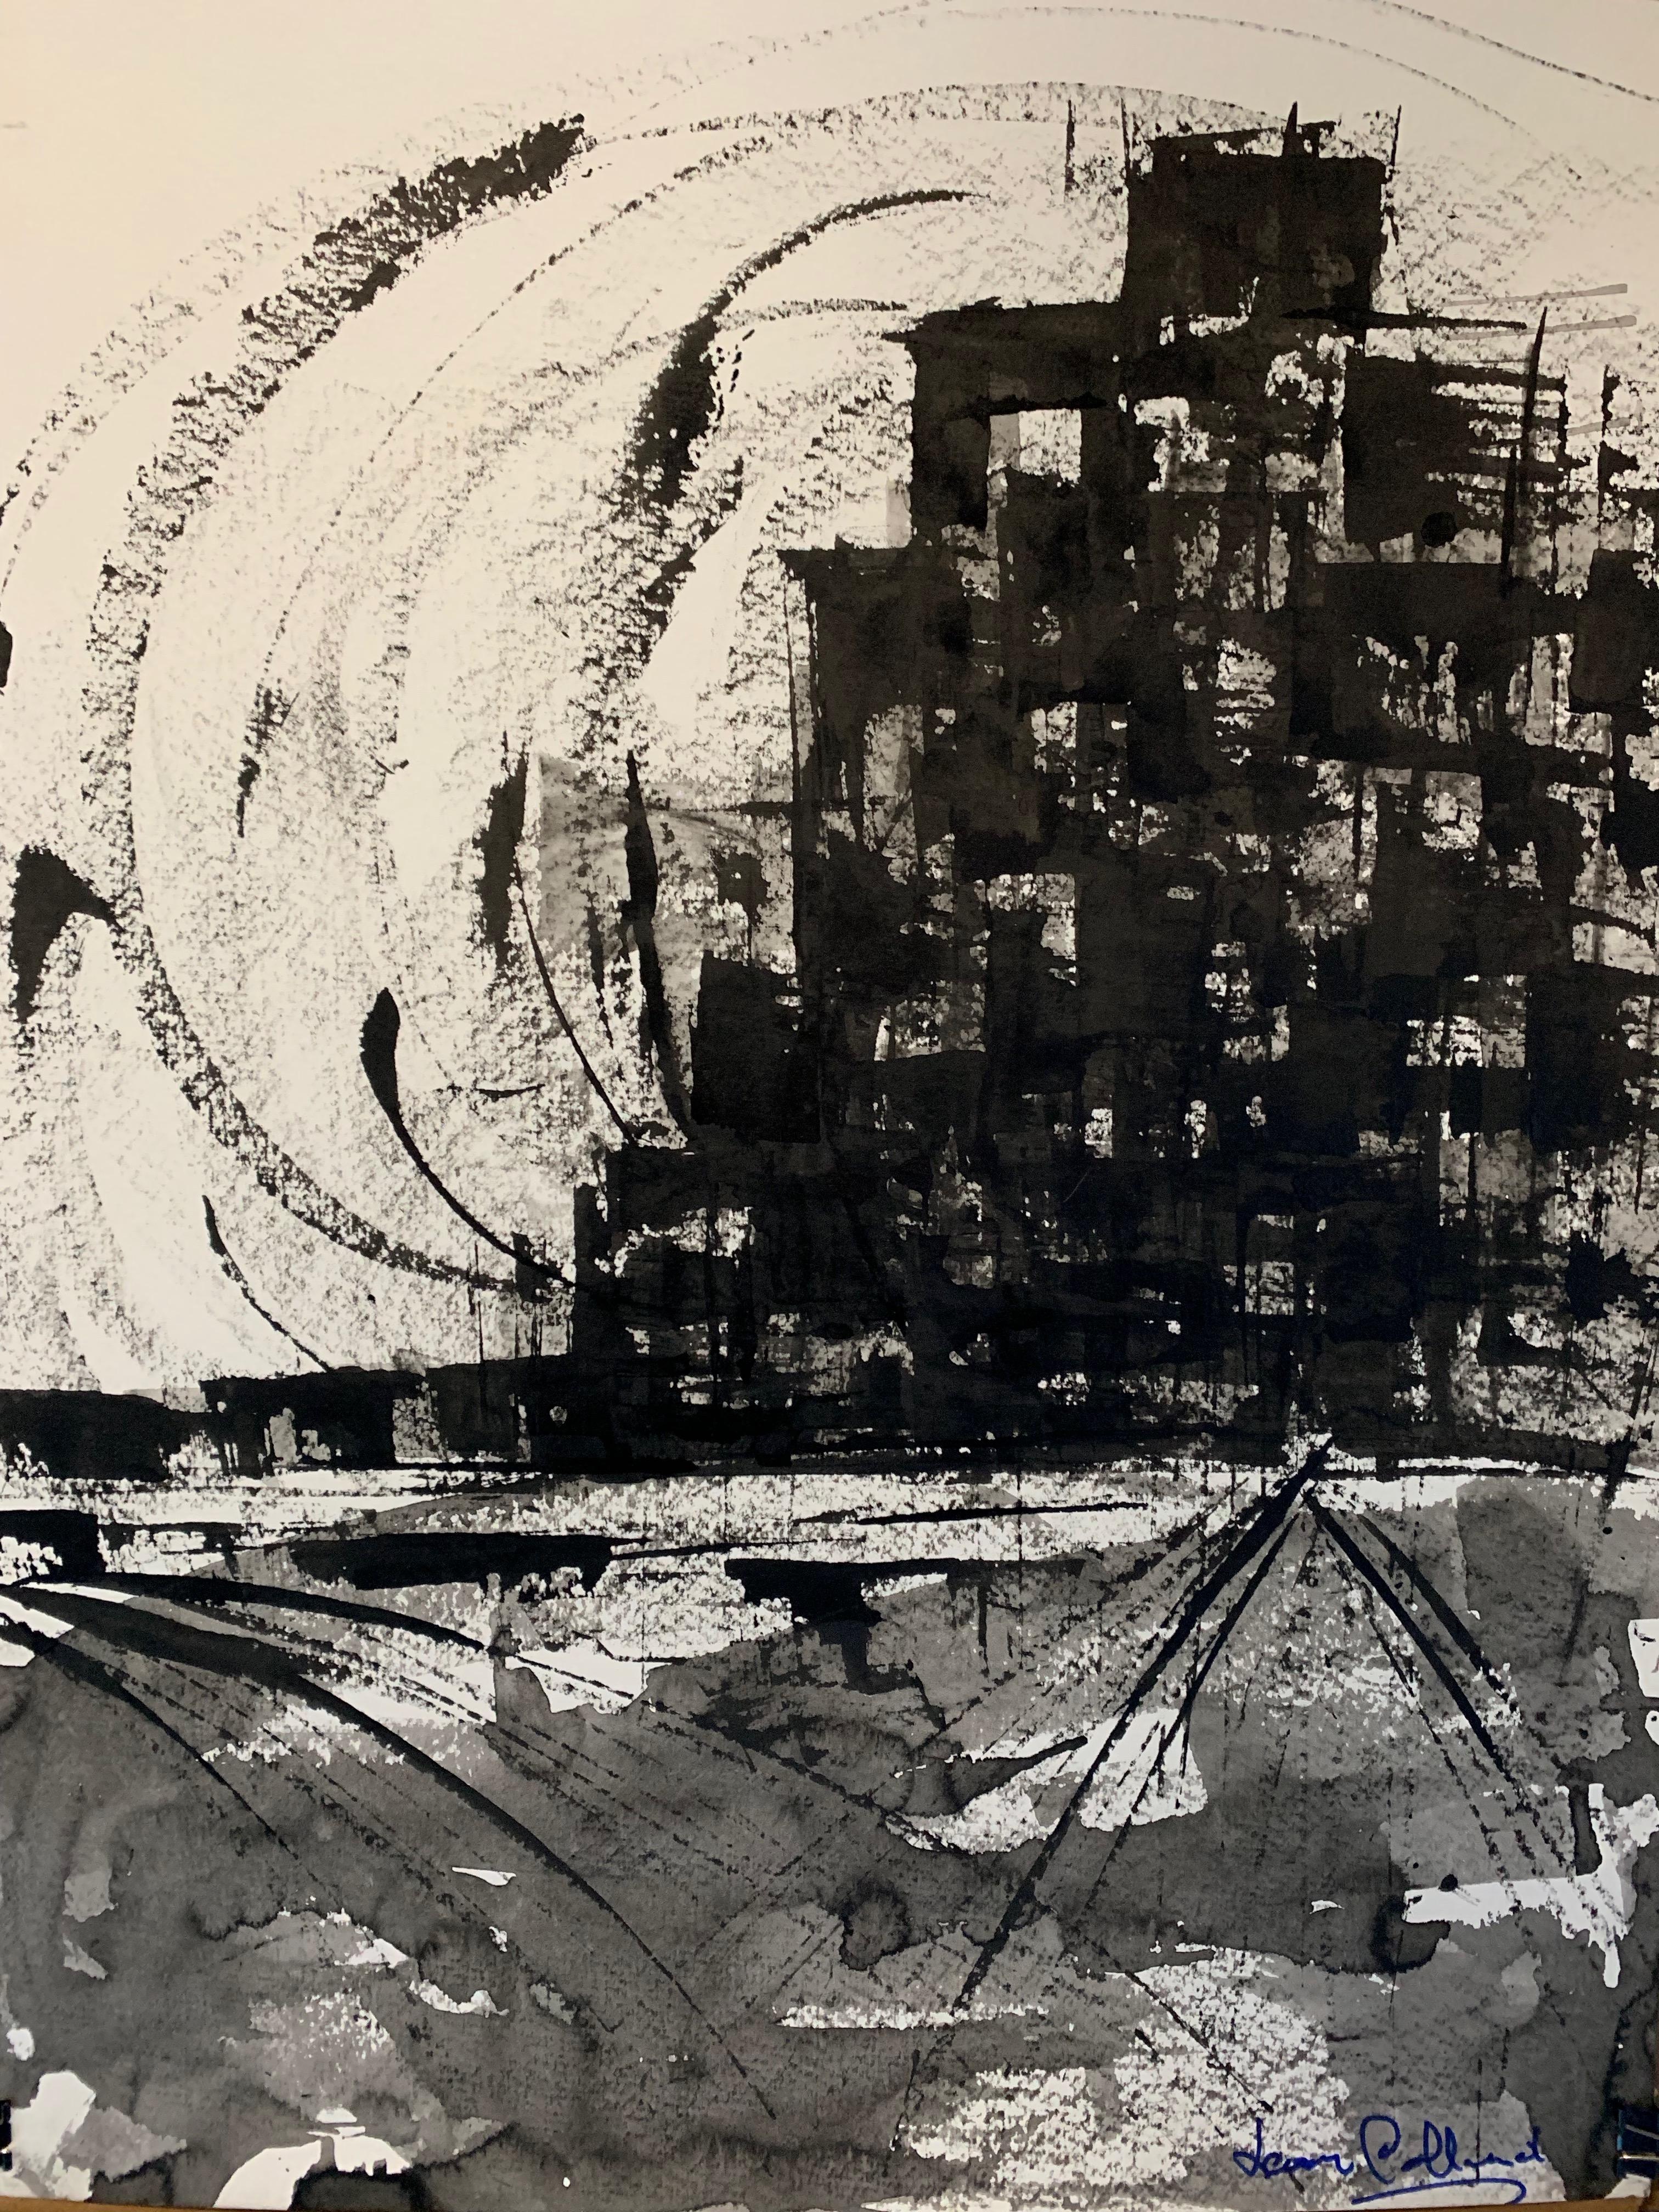 1980s "Cityscape of Black and White" Abstract Landscape Painting